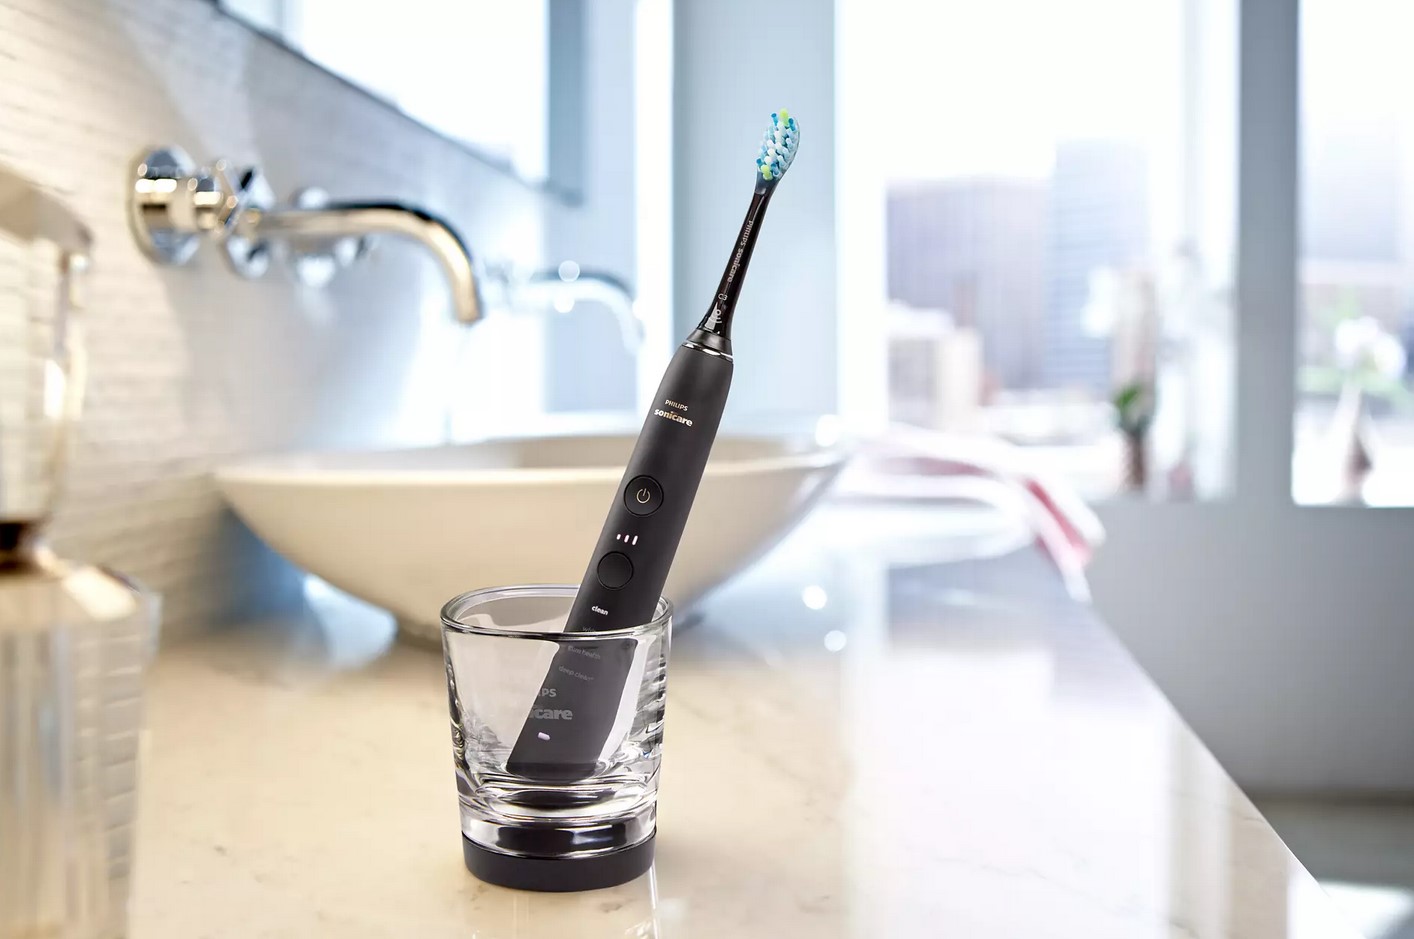 Philips DiamondClean 9000 – the high-tech toothbrush (review)